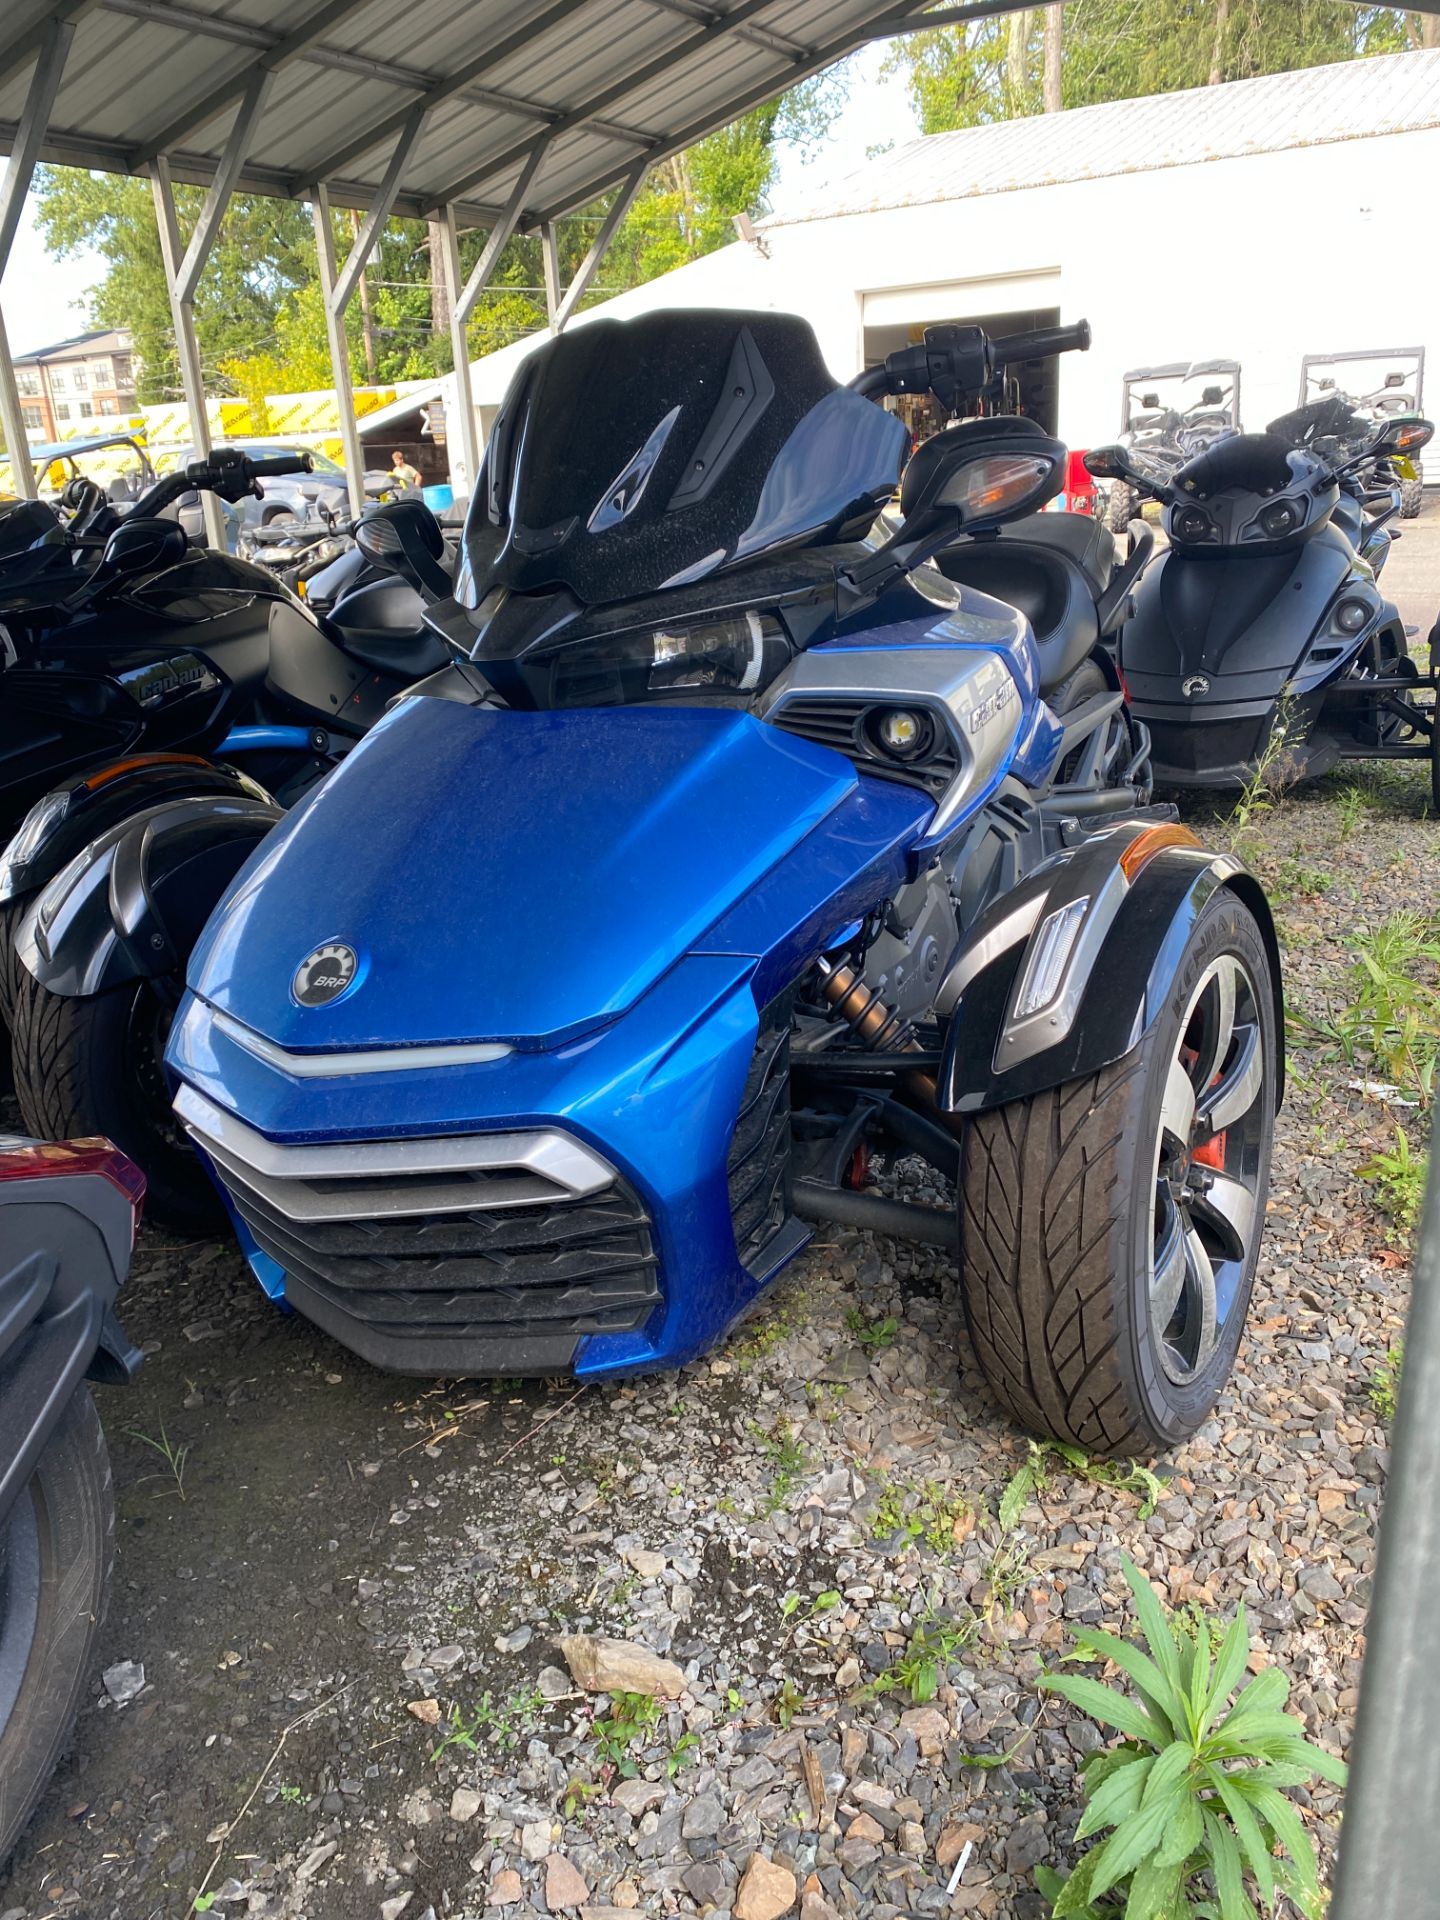 2017 Can-Am Spyder F3-S SE6 in New Britain, Pennsylvania - Photo 1